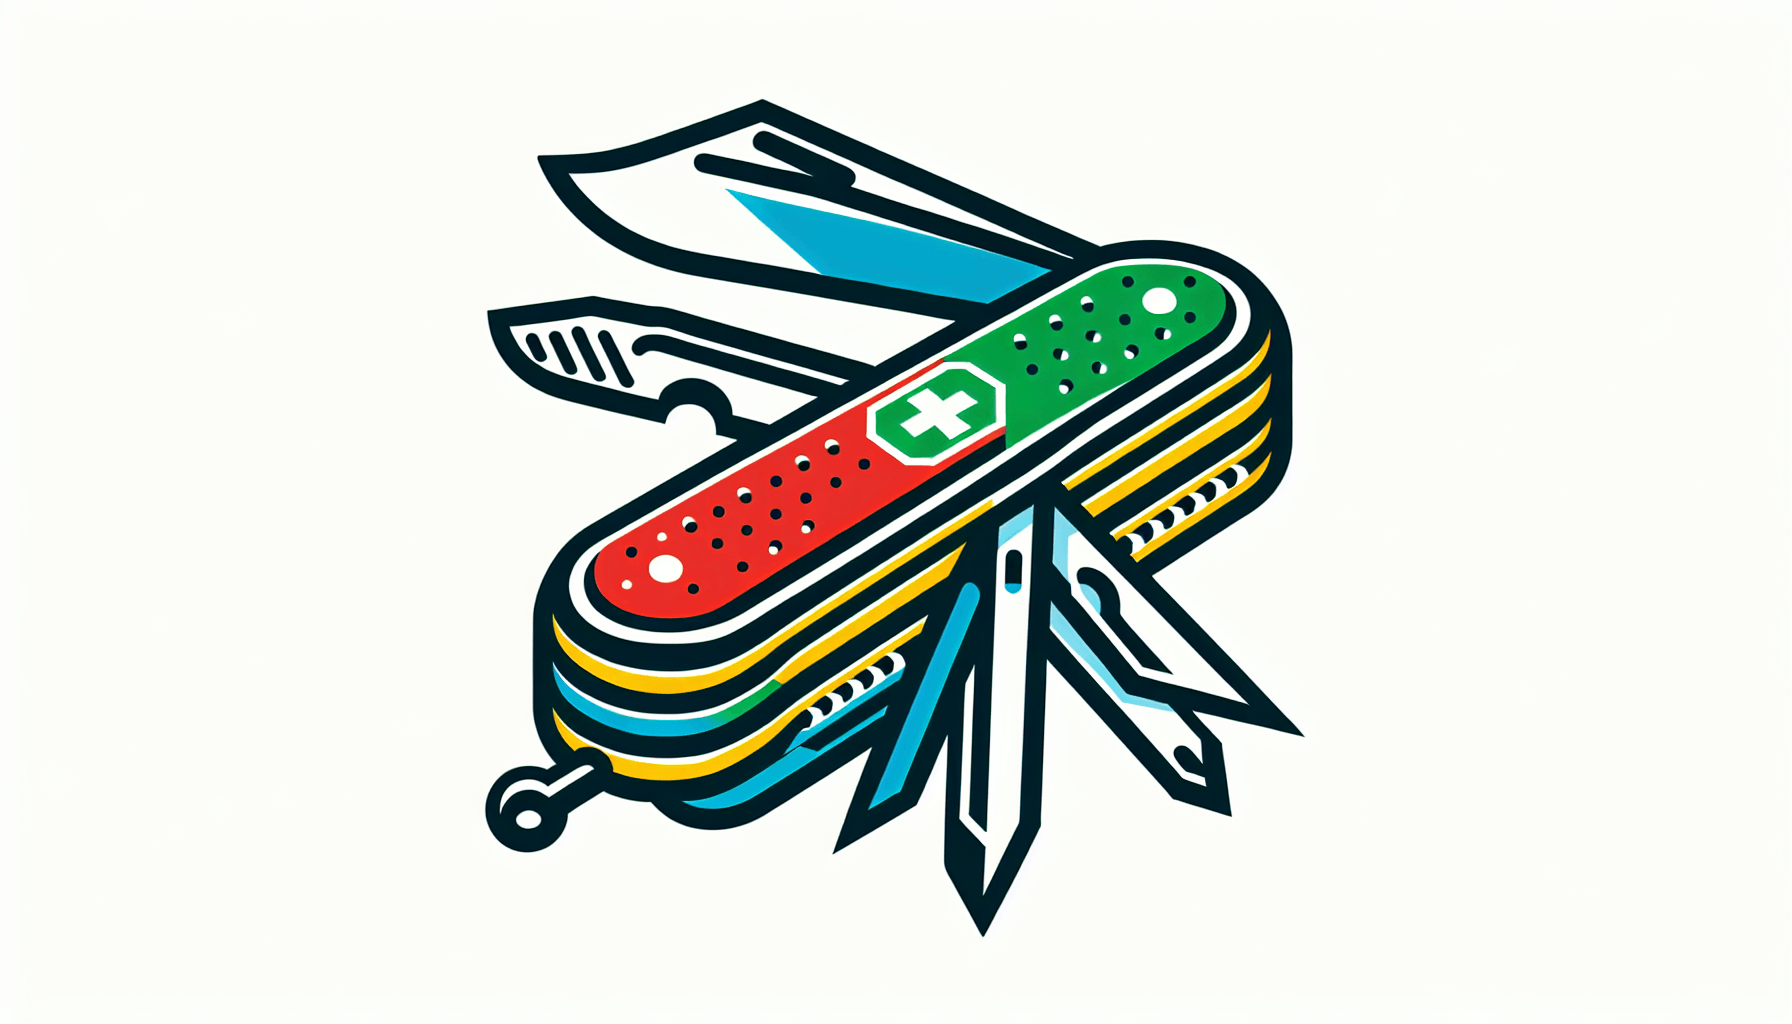 Swiss army knife in flat illustration style and white background, red #f47574, green #88c7a8, yellow #fcc44b, and blue #645bc8 colors.